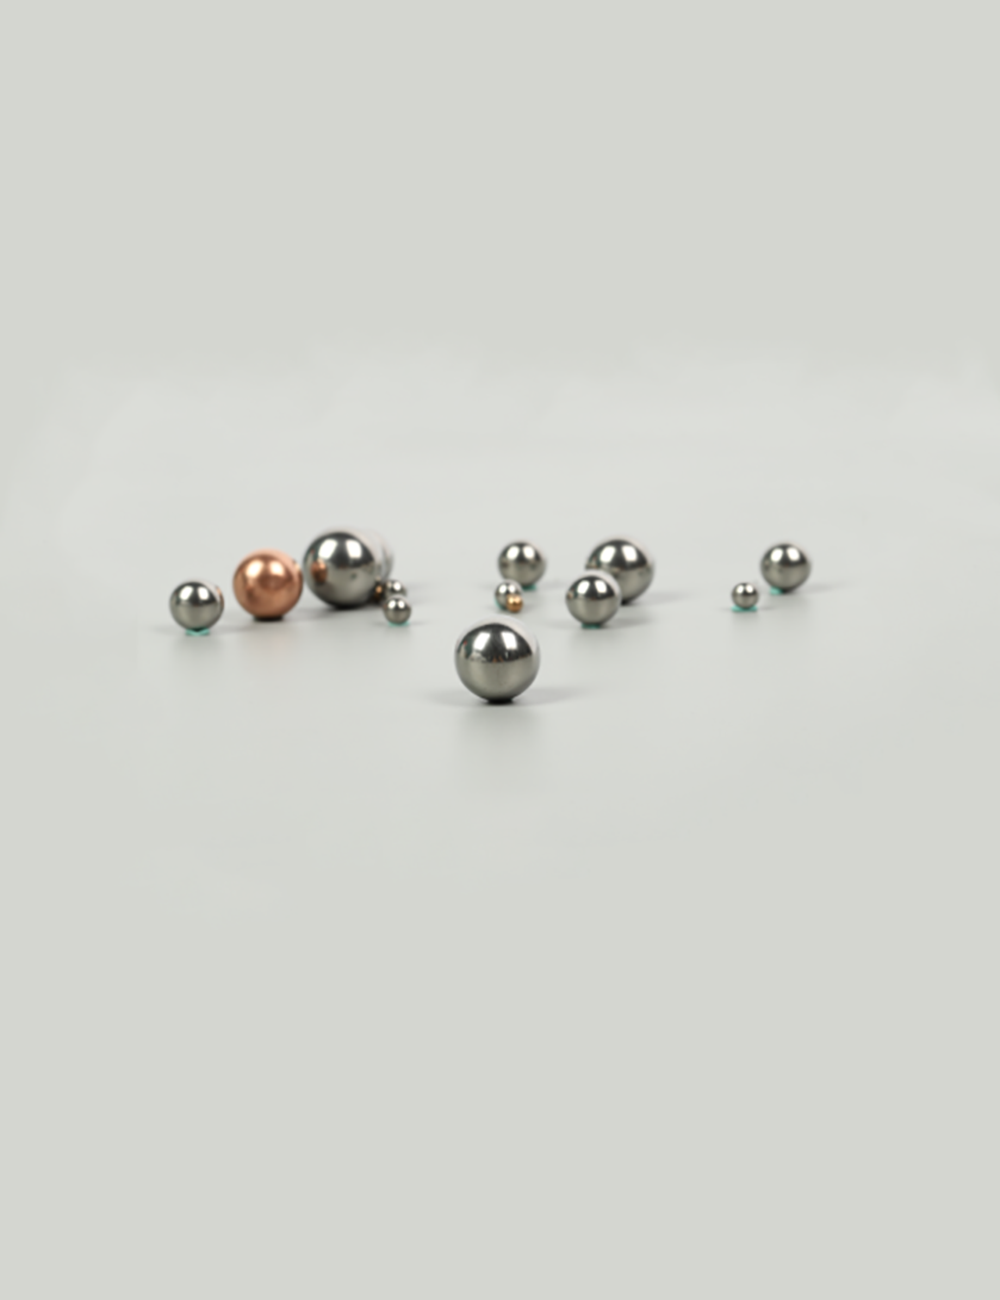  Steel ball for other application